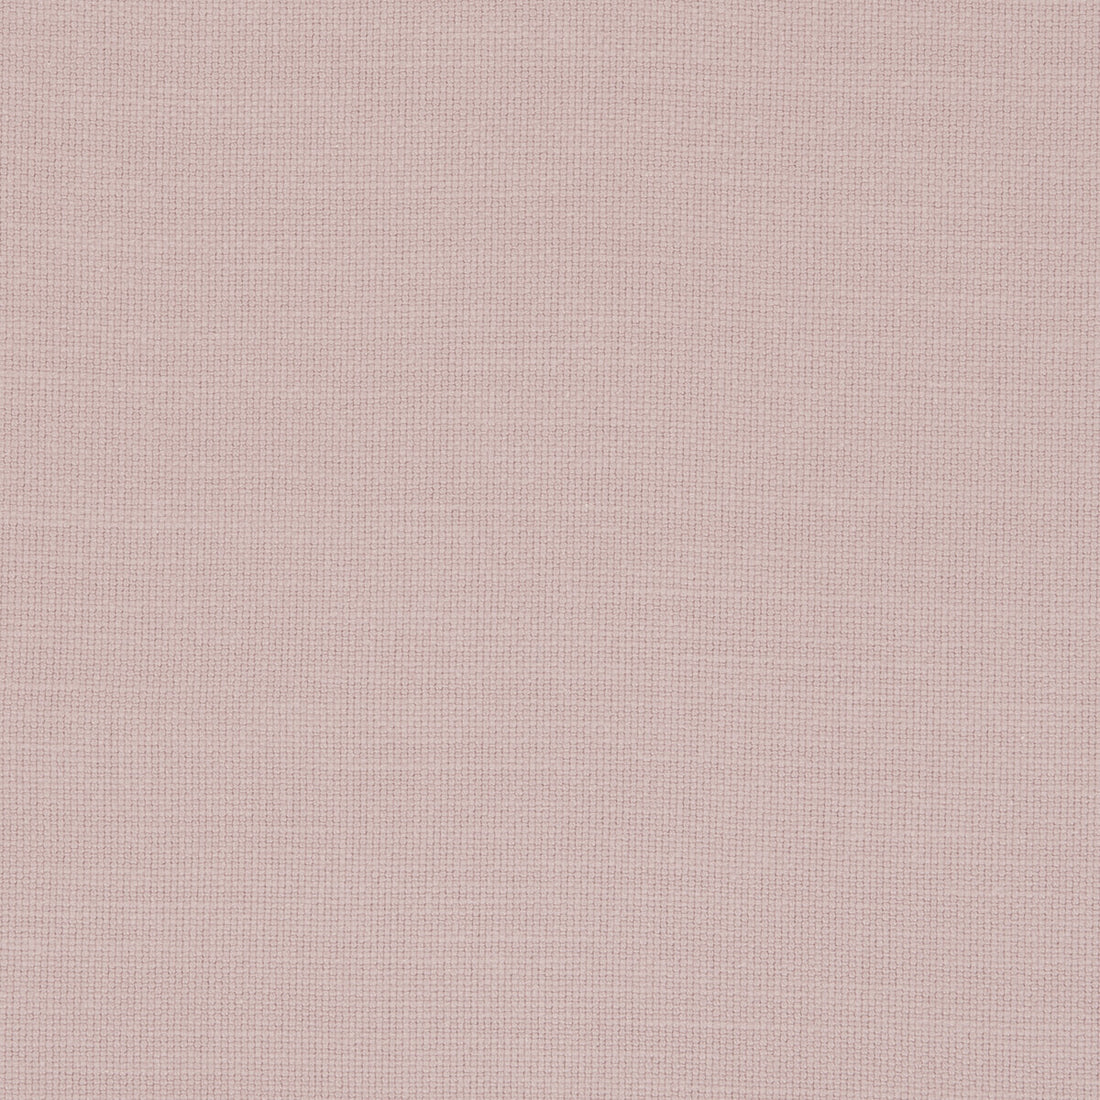 Nantucket fabric in rose color - pattern F0594/42.CAC.0 - by Clarke And Clarke in the Clarke &amp; Clarke Nantucket collection